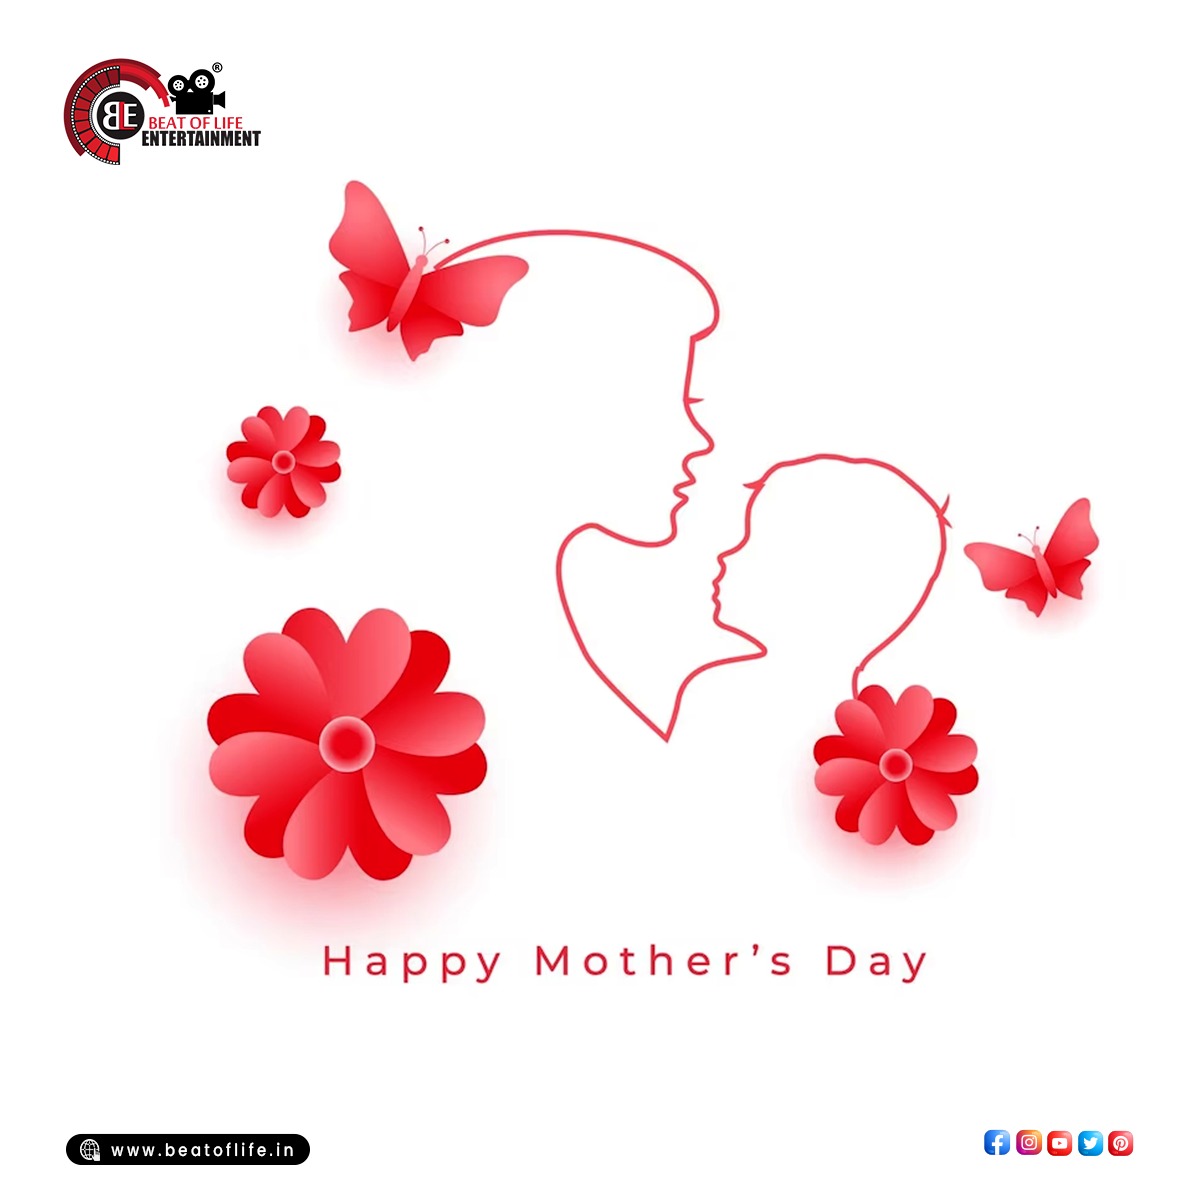 Happy Mother's Day Wishes - Beat of Life Entertainment